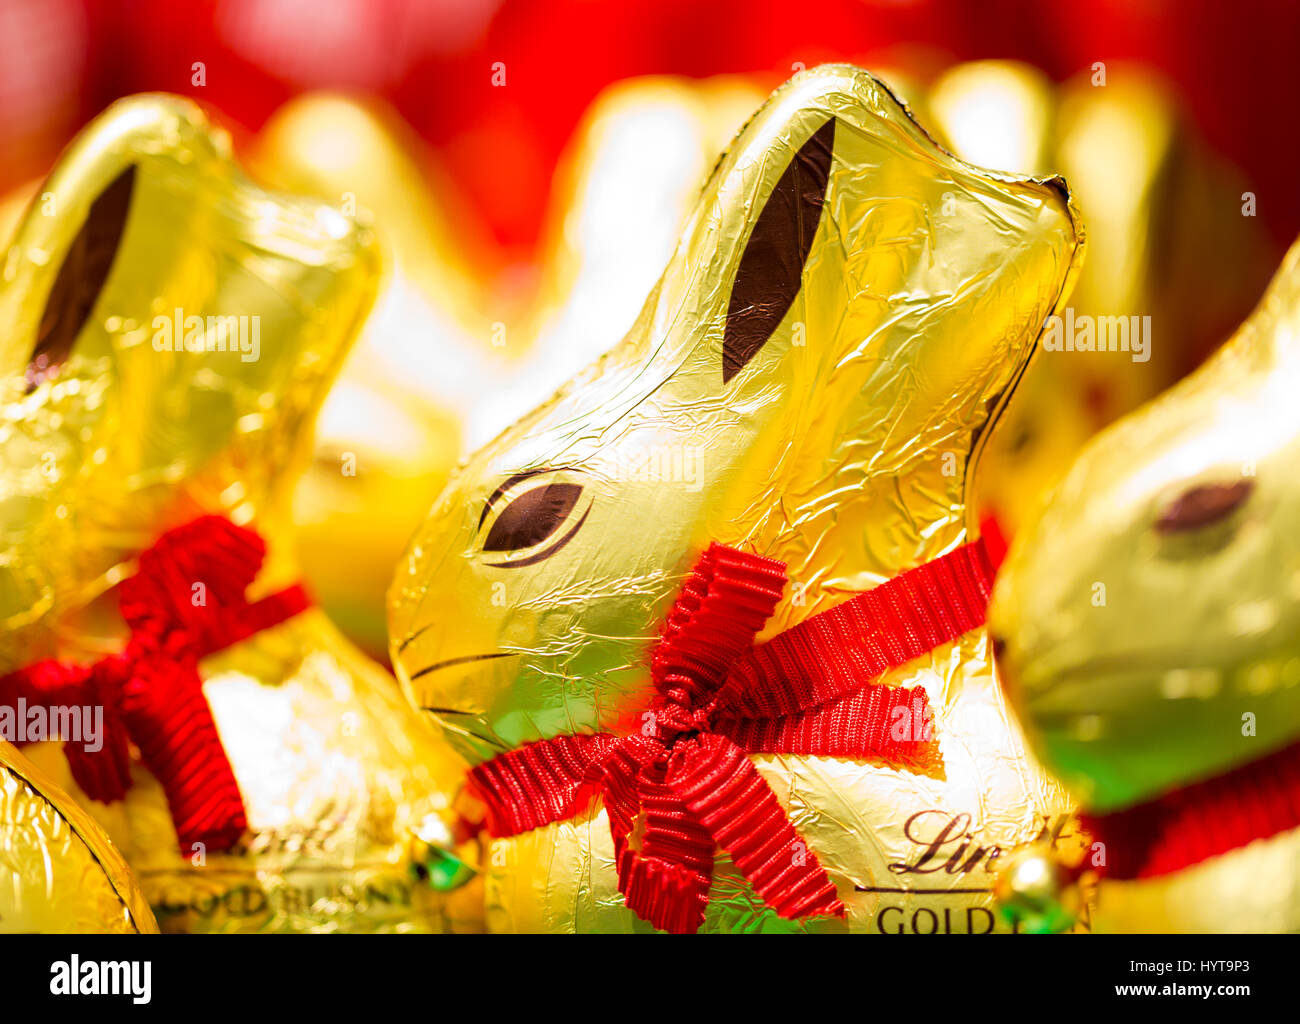 Easter bunny Lindt chocolate on shelves in supermarket for sale wrapped in golden foil. Lindt & Sprüngli  produces the highest quality premium chocola Stock Photo